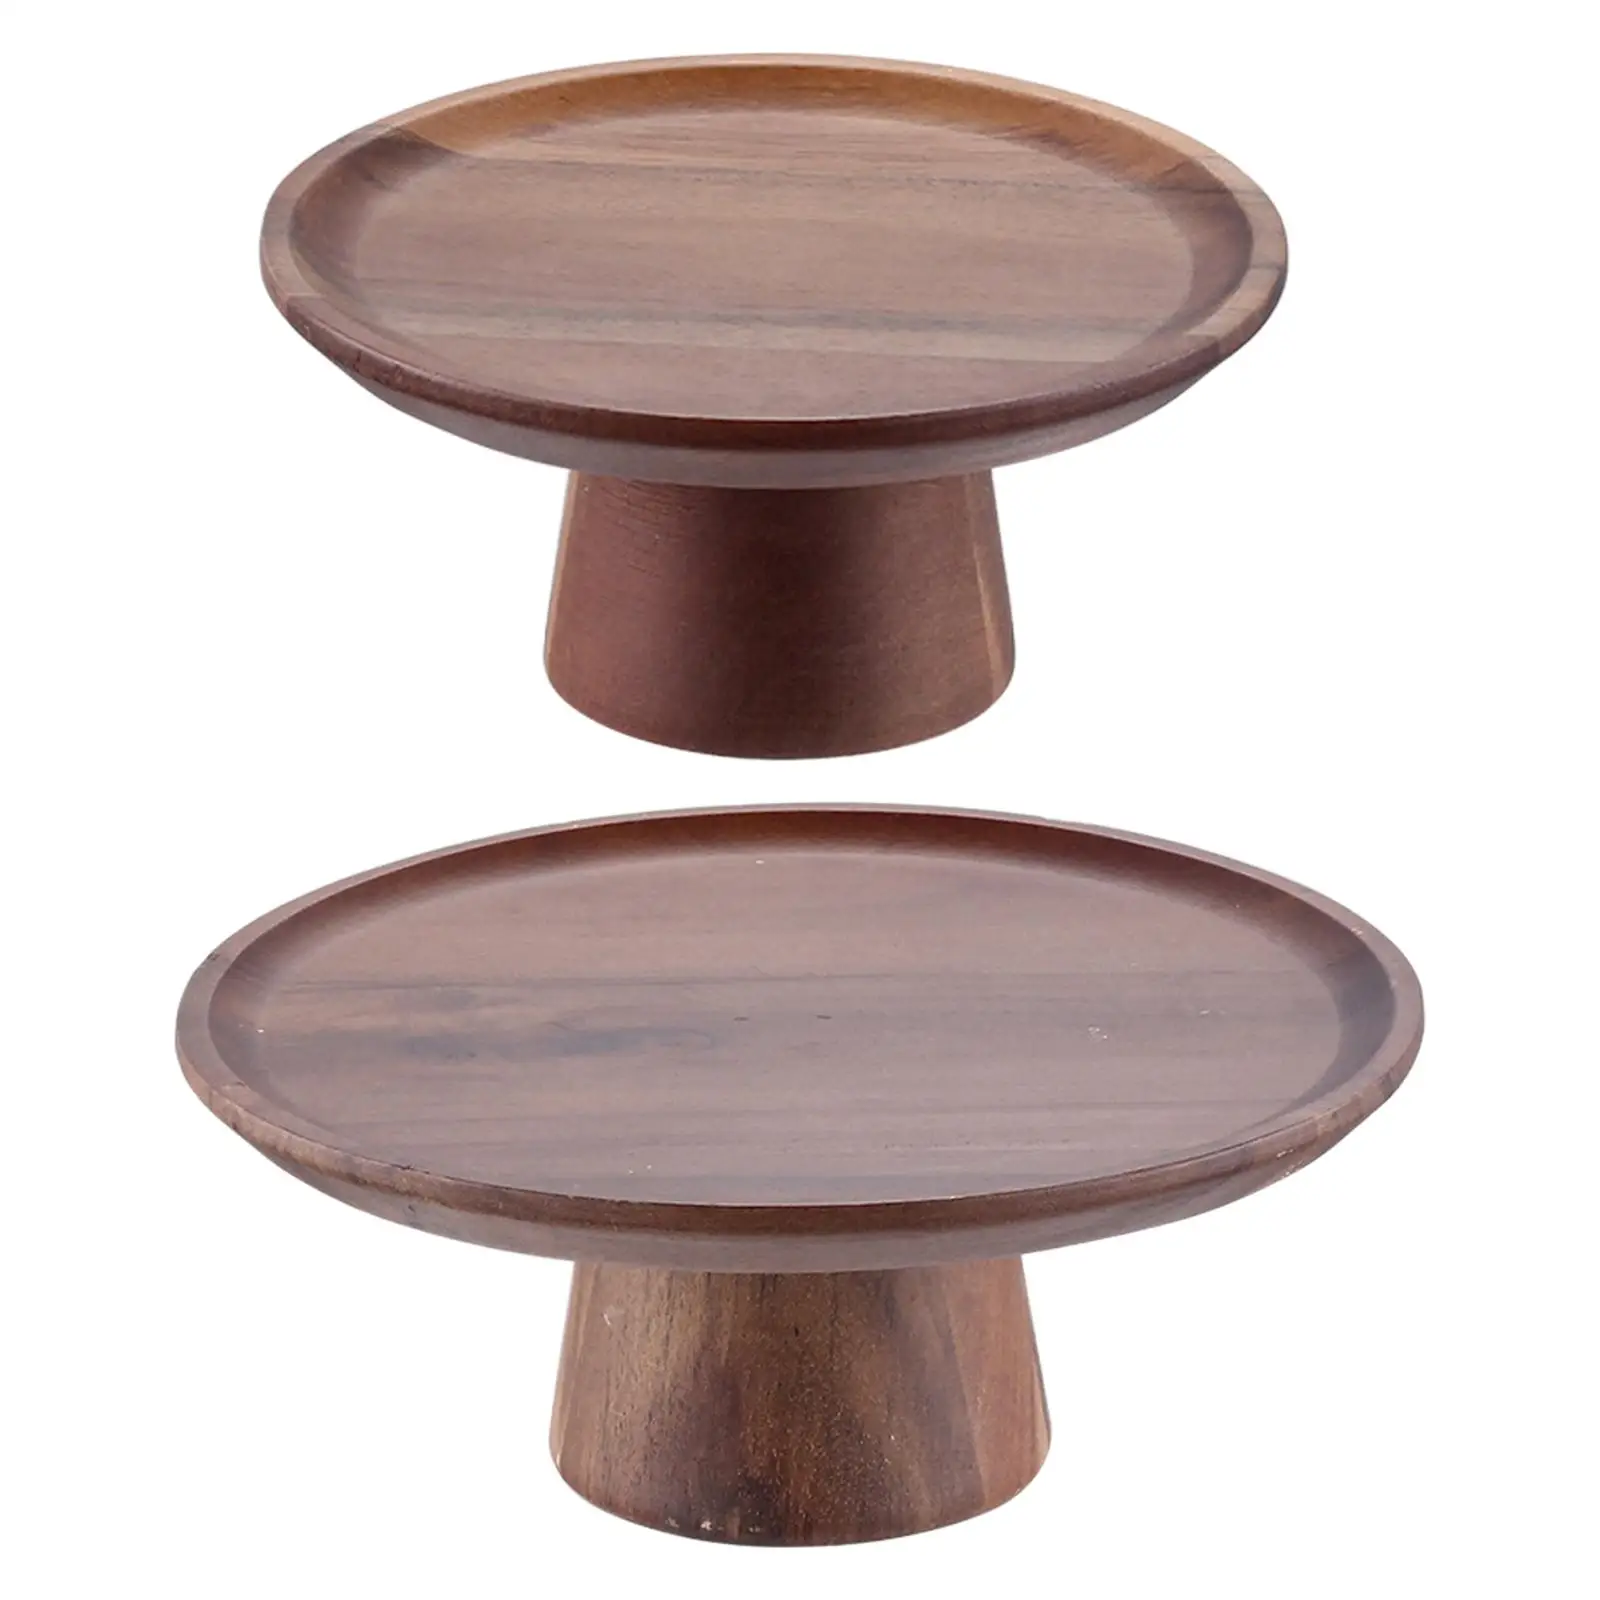 Wooden Cake Stand Serving Tray Dessert Display Plate High Wood Pedestal for Table